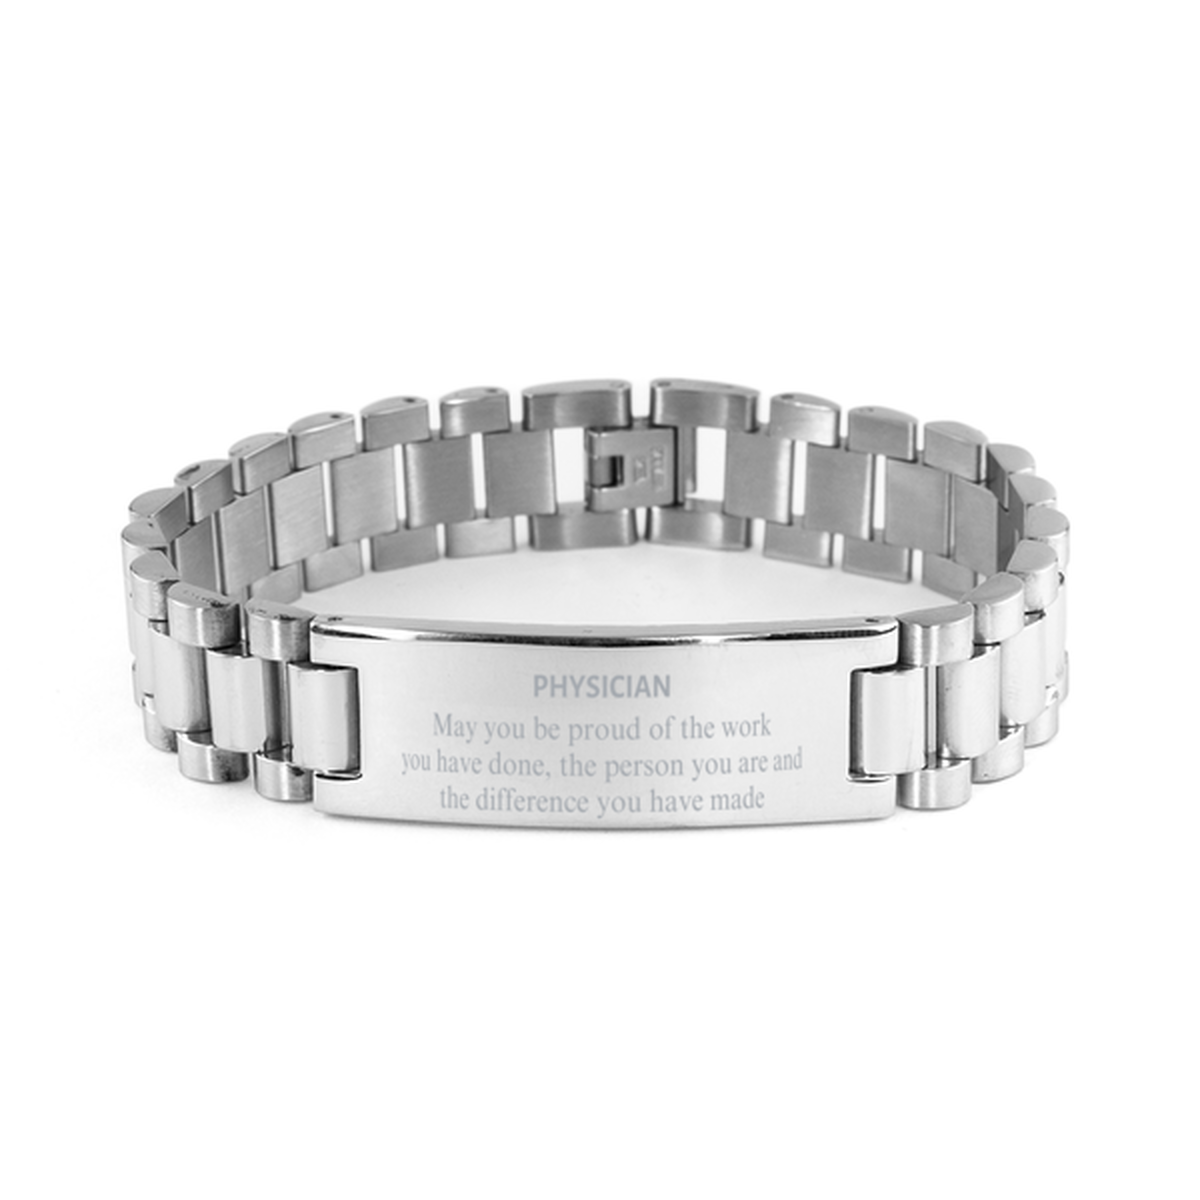 Physician May you be proud of the work you have done, Retirement Physician Ladder Stainless Steel Bracelet for Colleague Appreciation Gifts Amazing for Physician